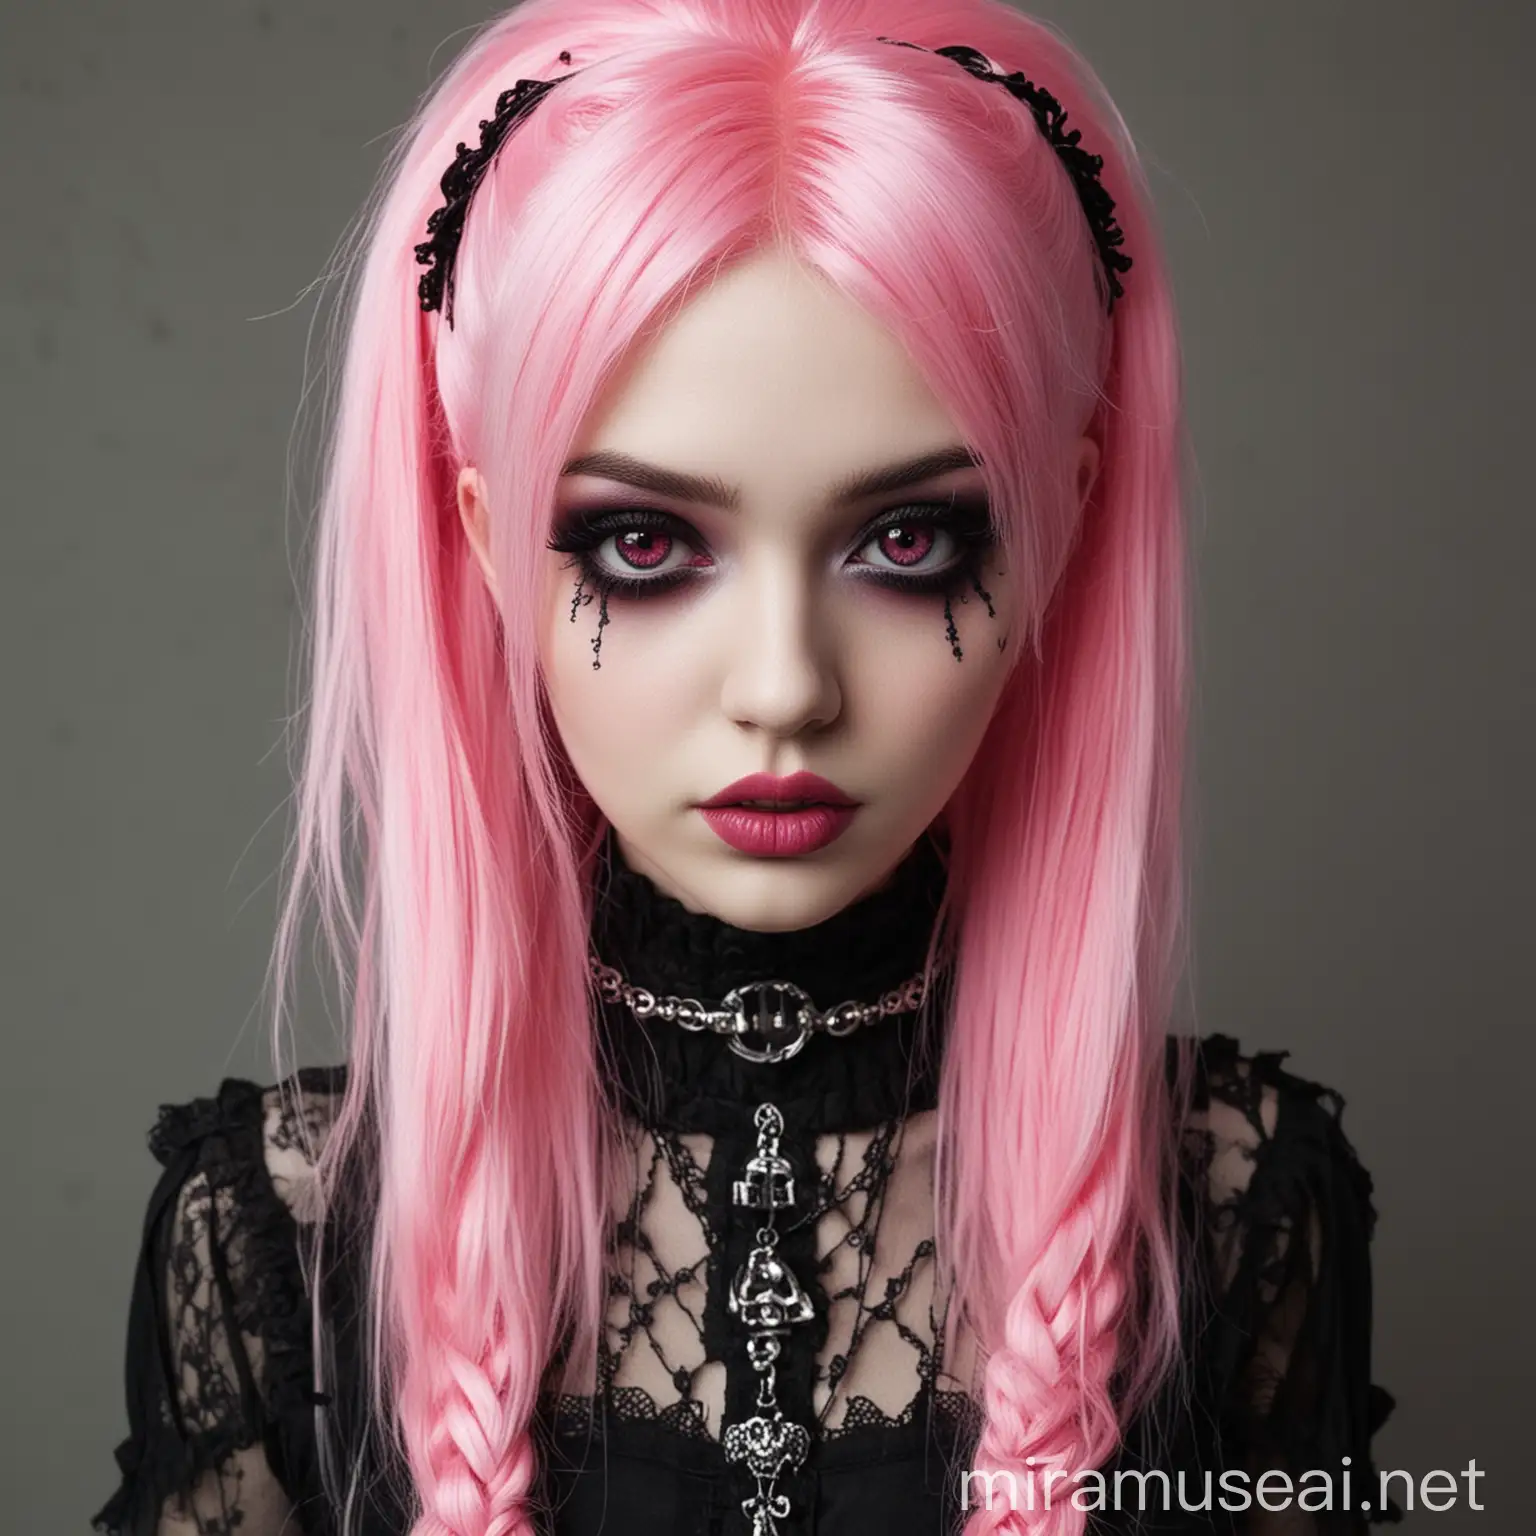 Goth girl, make it pink themed